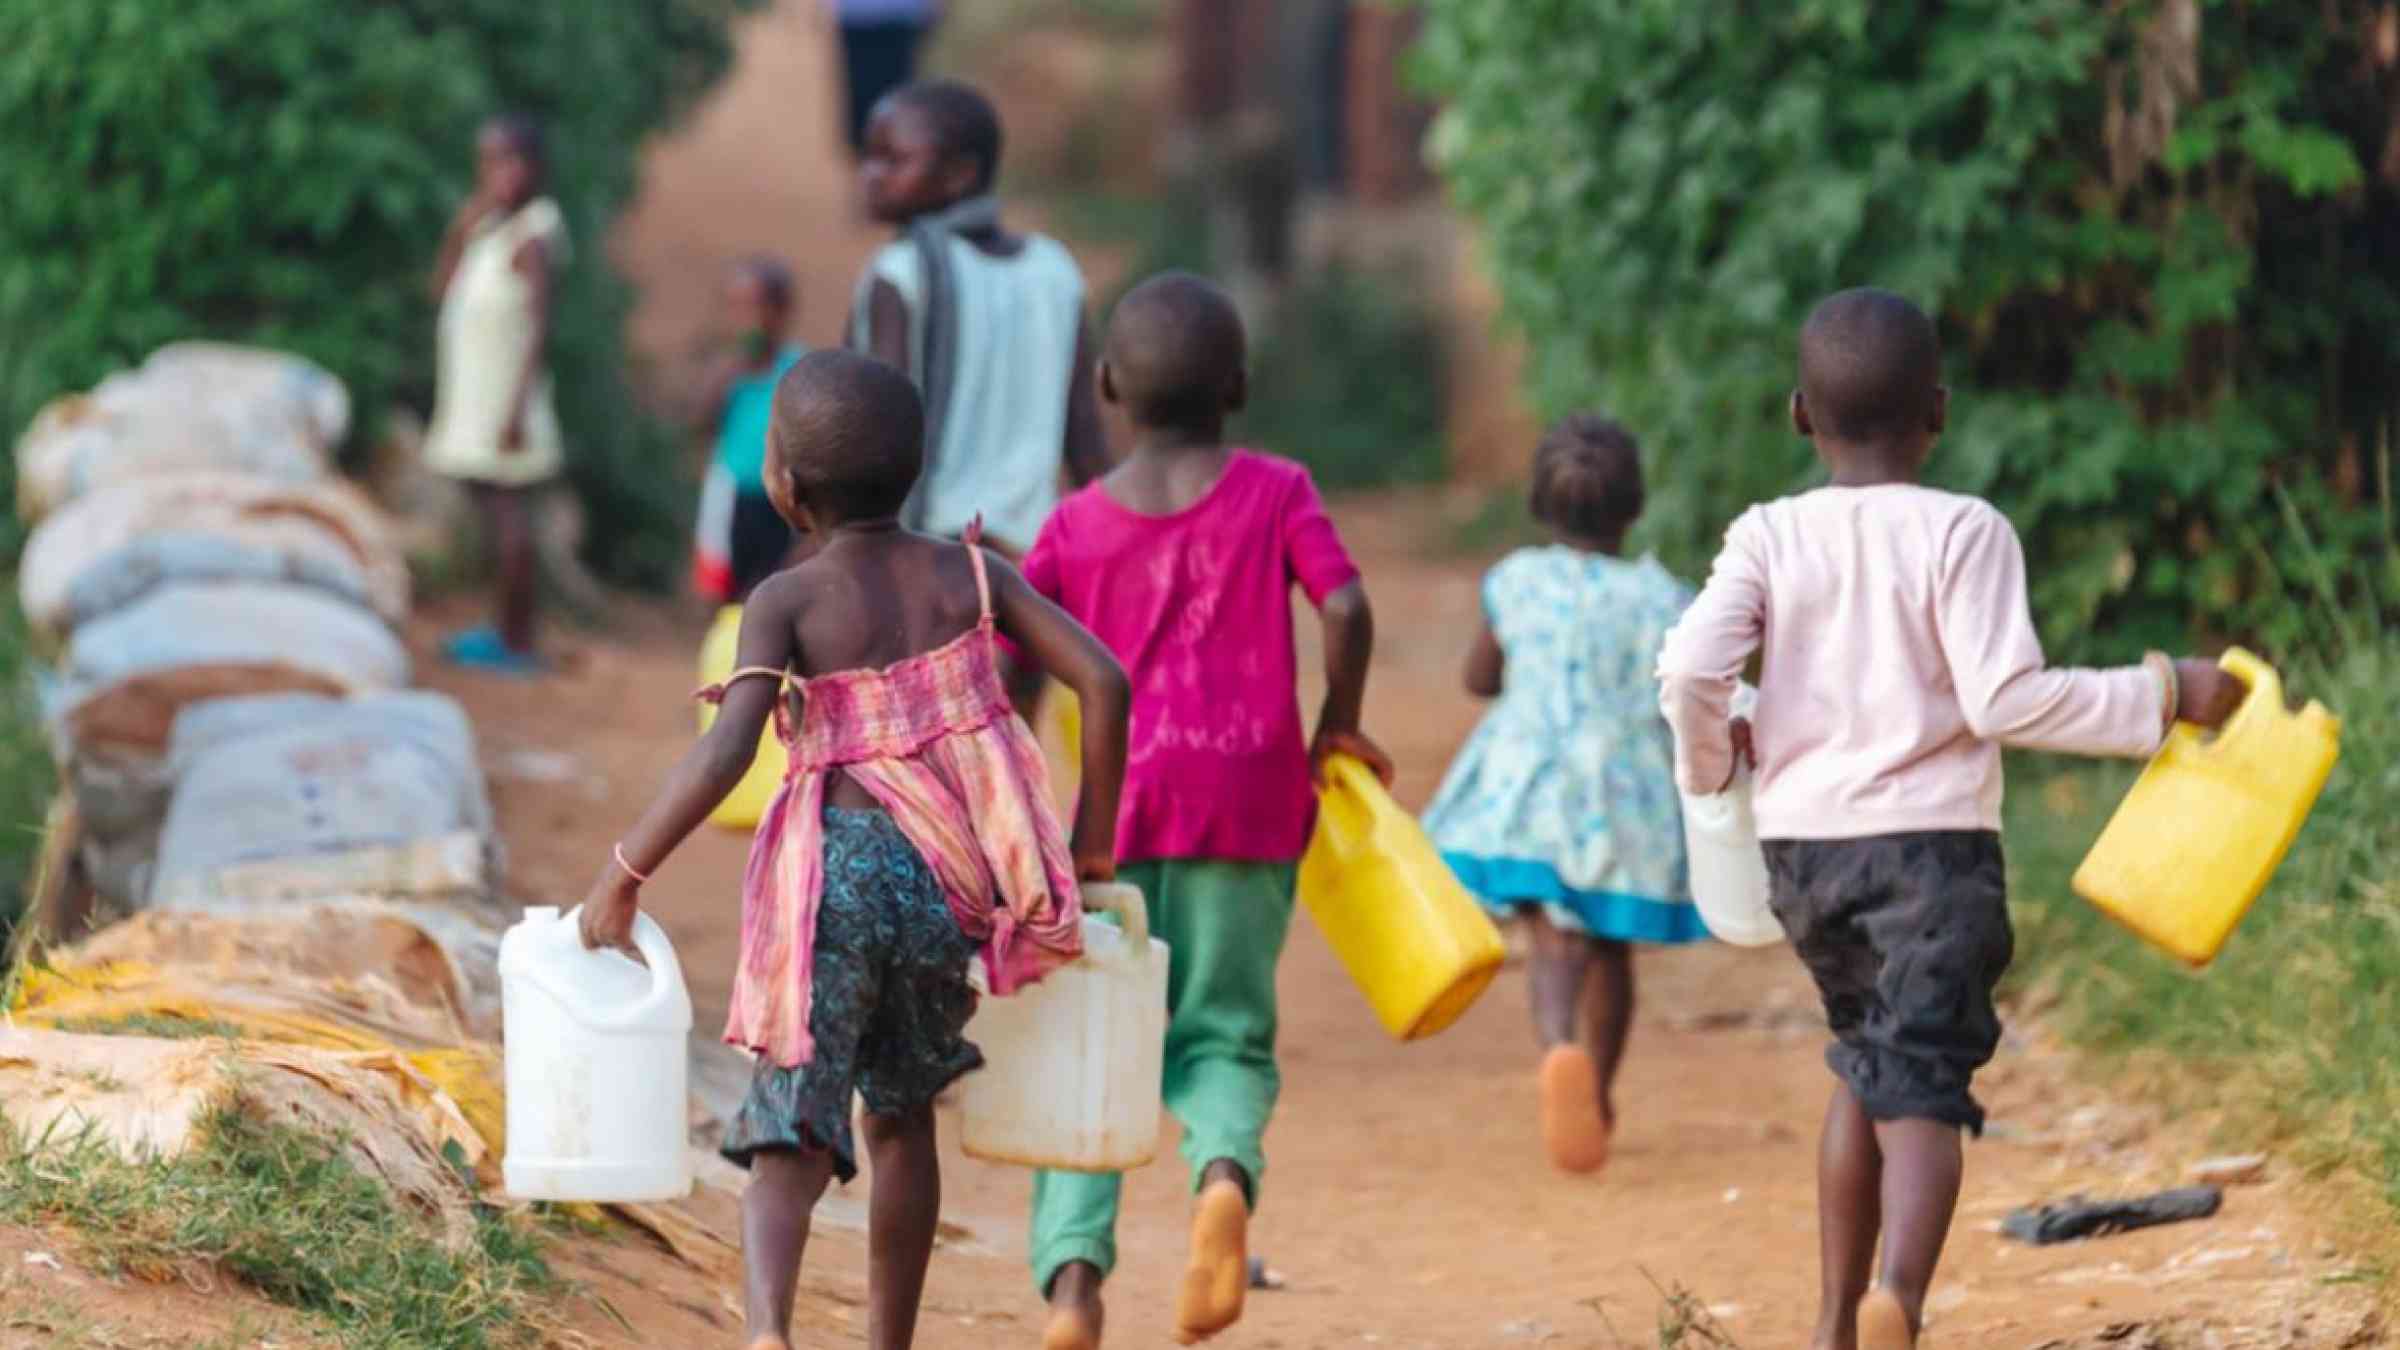 Children carry jugs of water on a dirt road